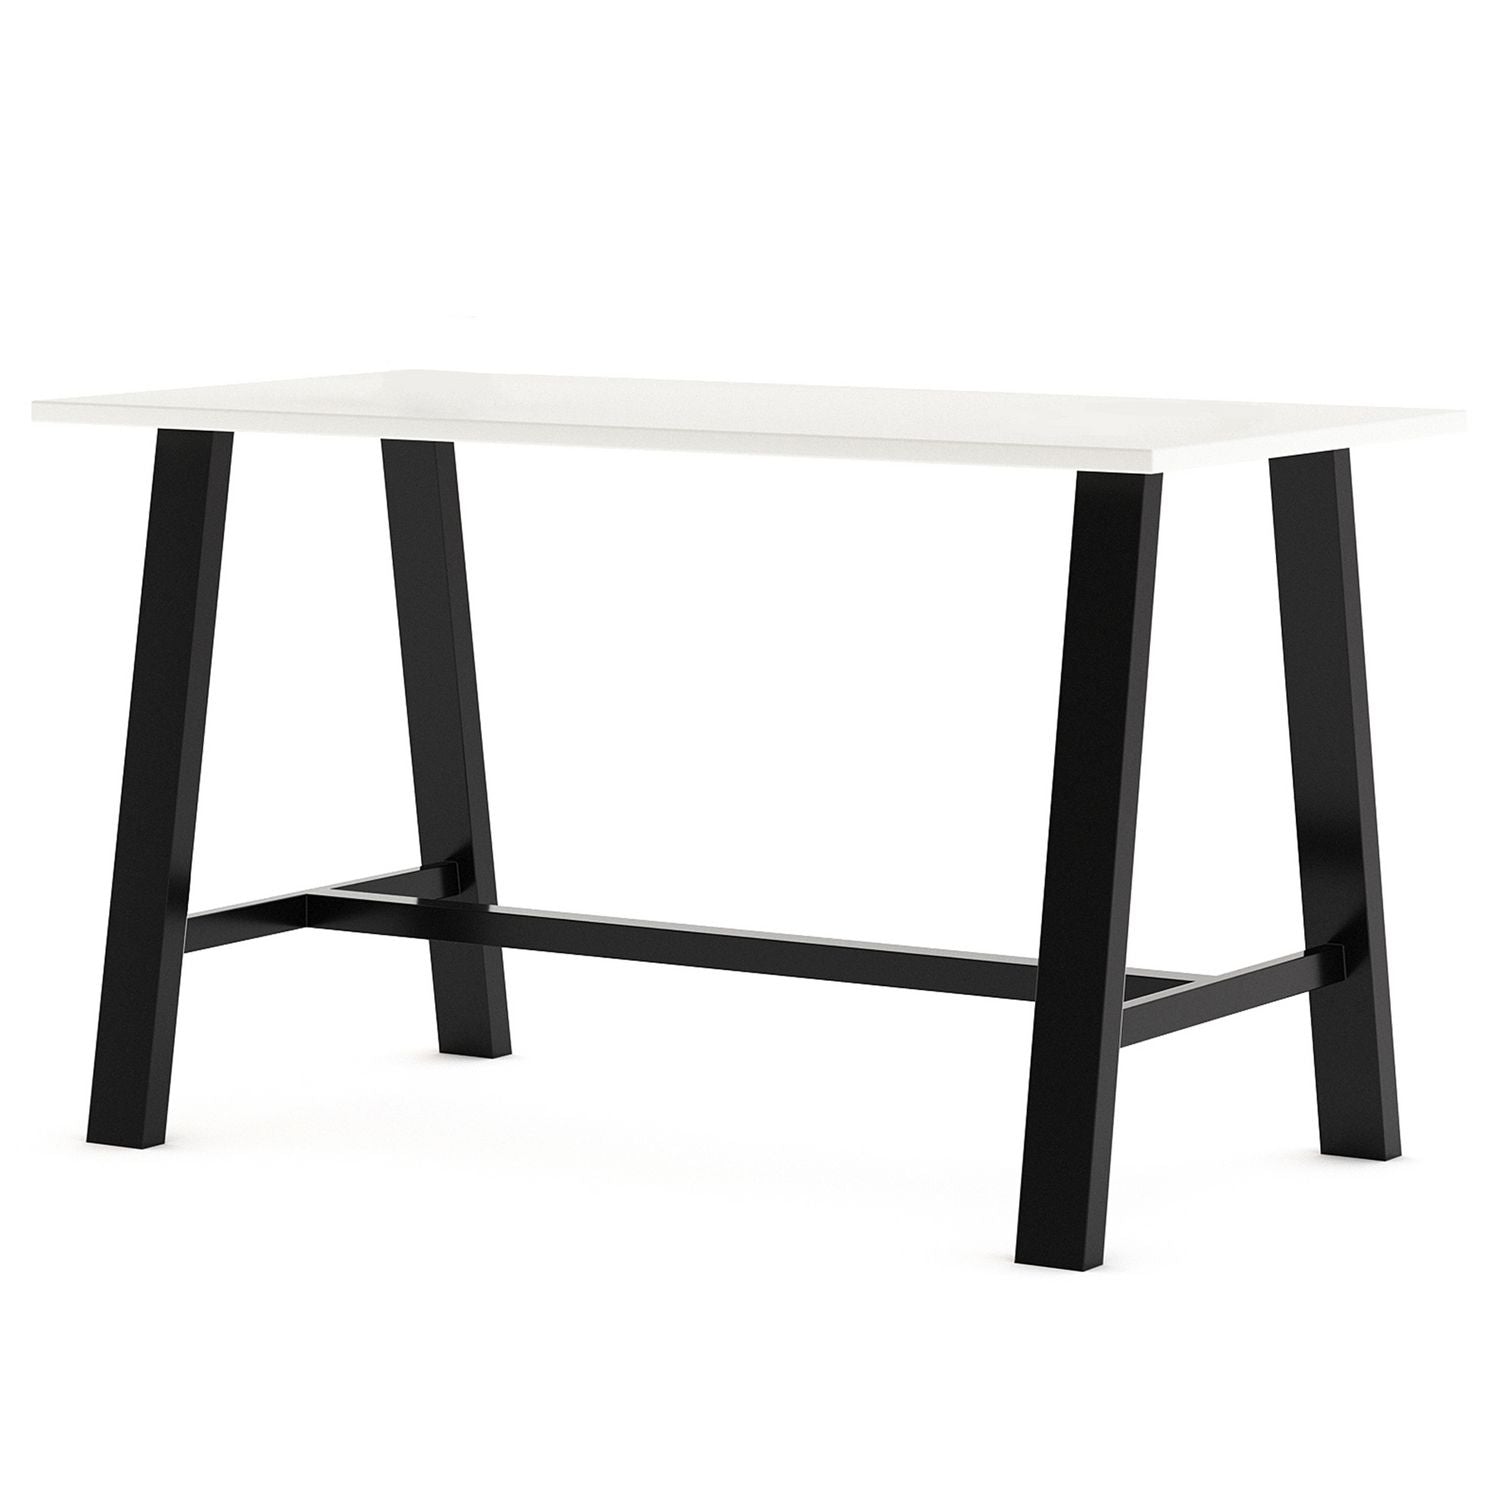 midtown-dining-table-with-four-black-kool-series-chairs-36-x-72-x-30-designer-white-ships-in-4-6-business-days_kfi840031900272 - 4